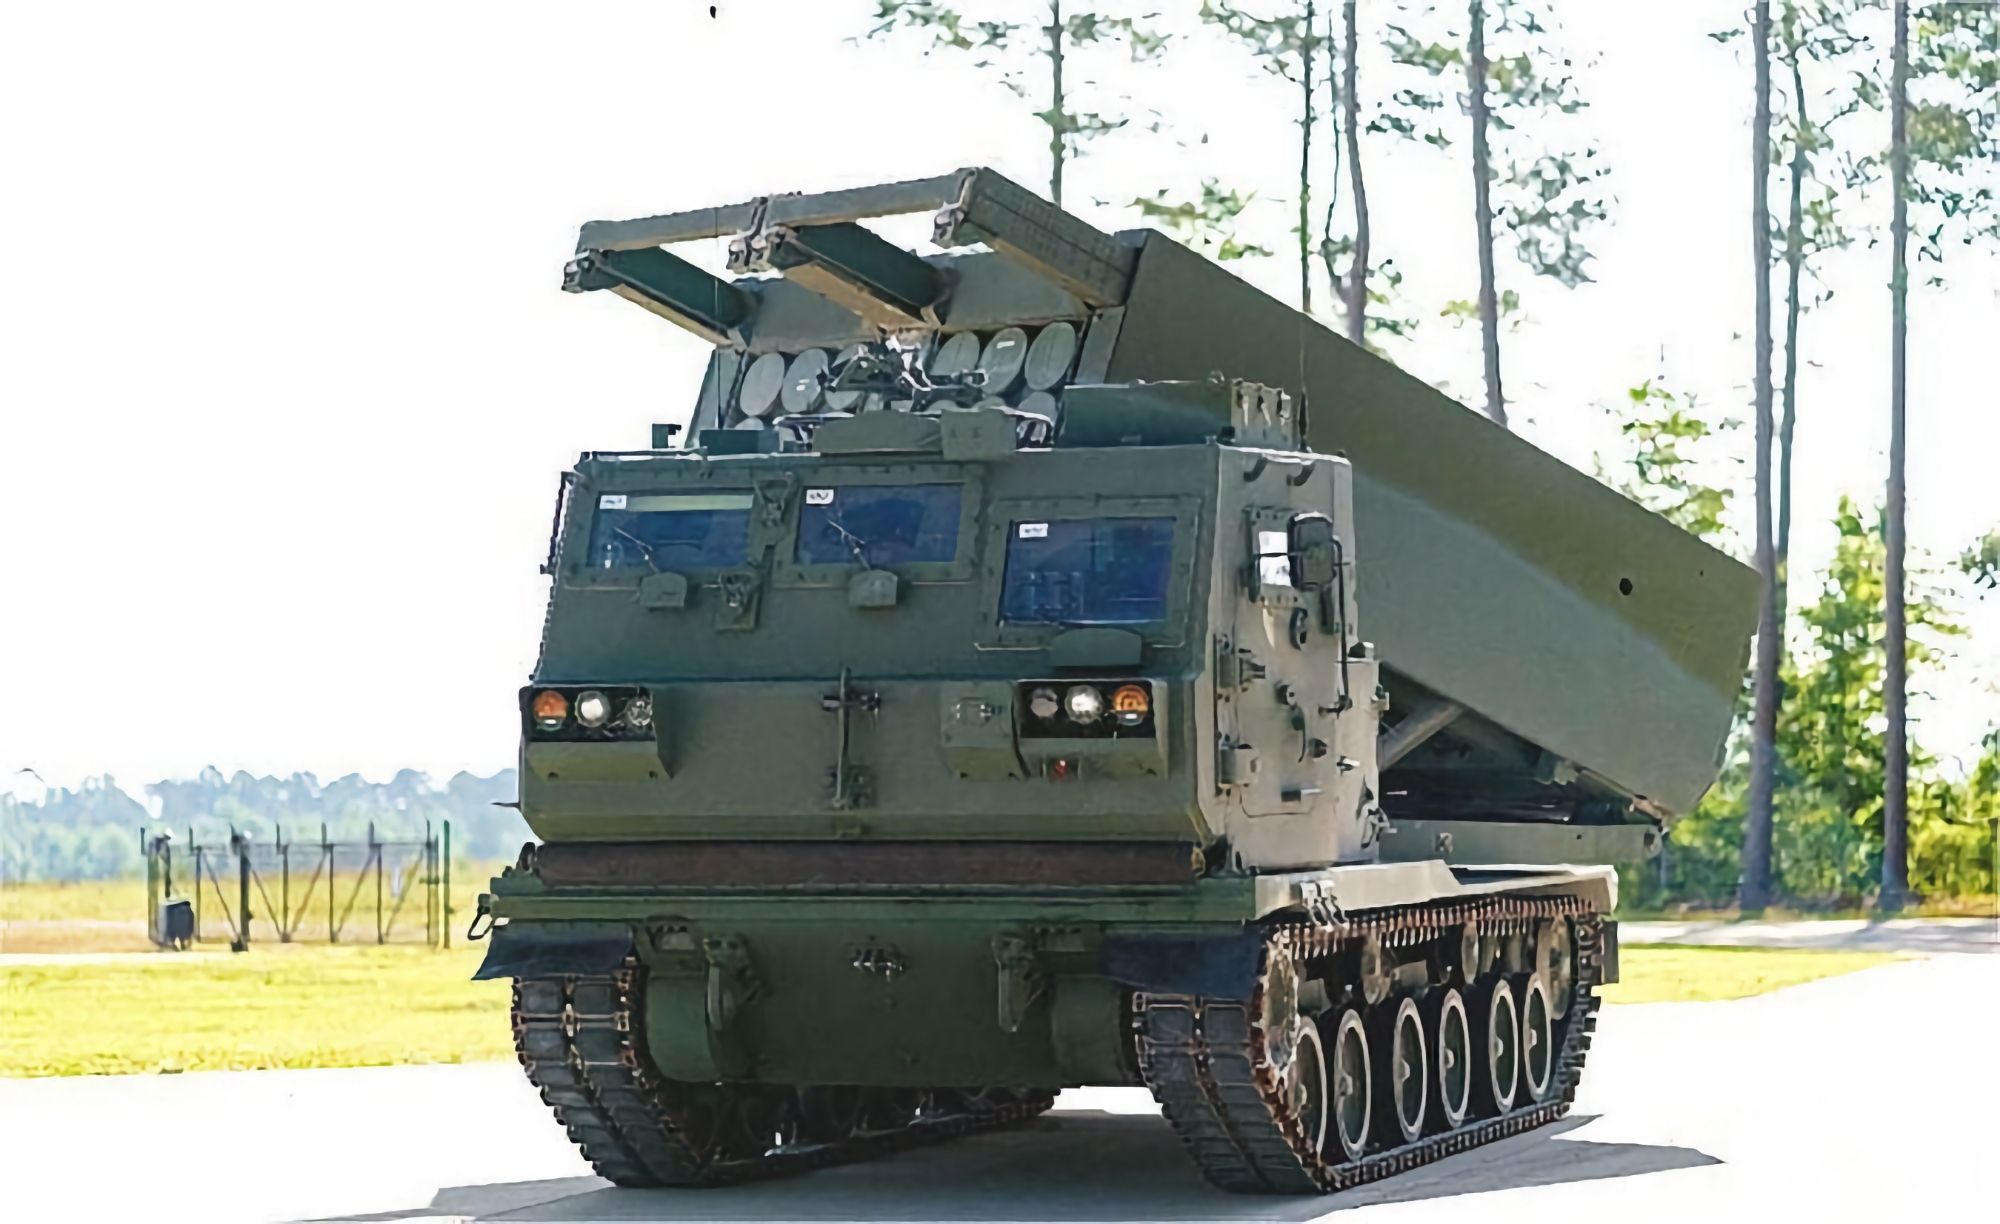 The US has ordered Lockheed Martin to upgrade additional M270 multiple rocket launchers, they will be able to launch PrSM missiles with a range of 500 kilometres